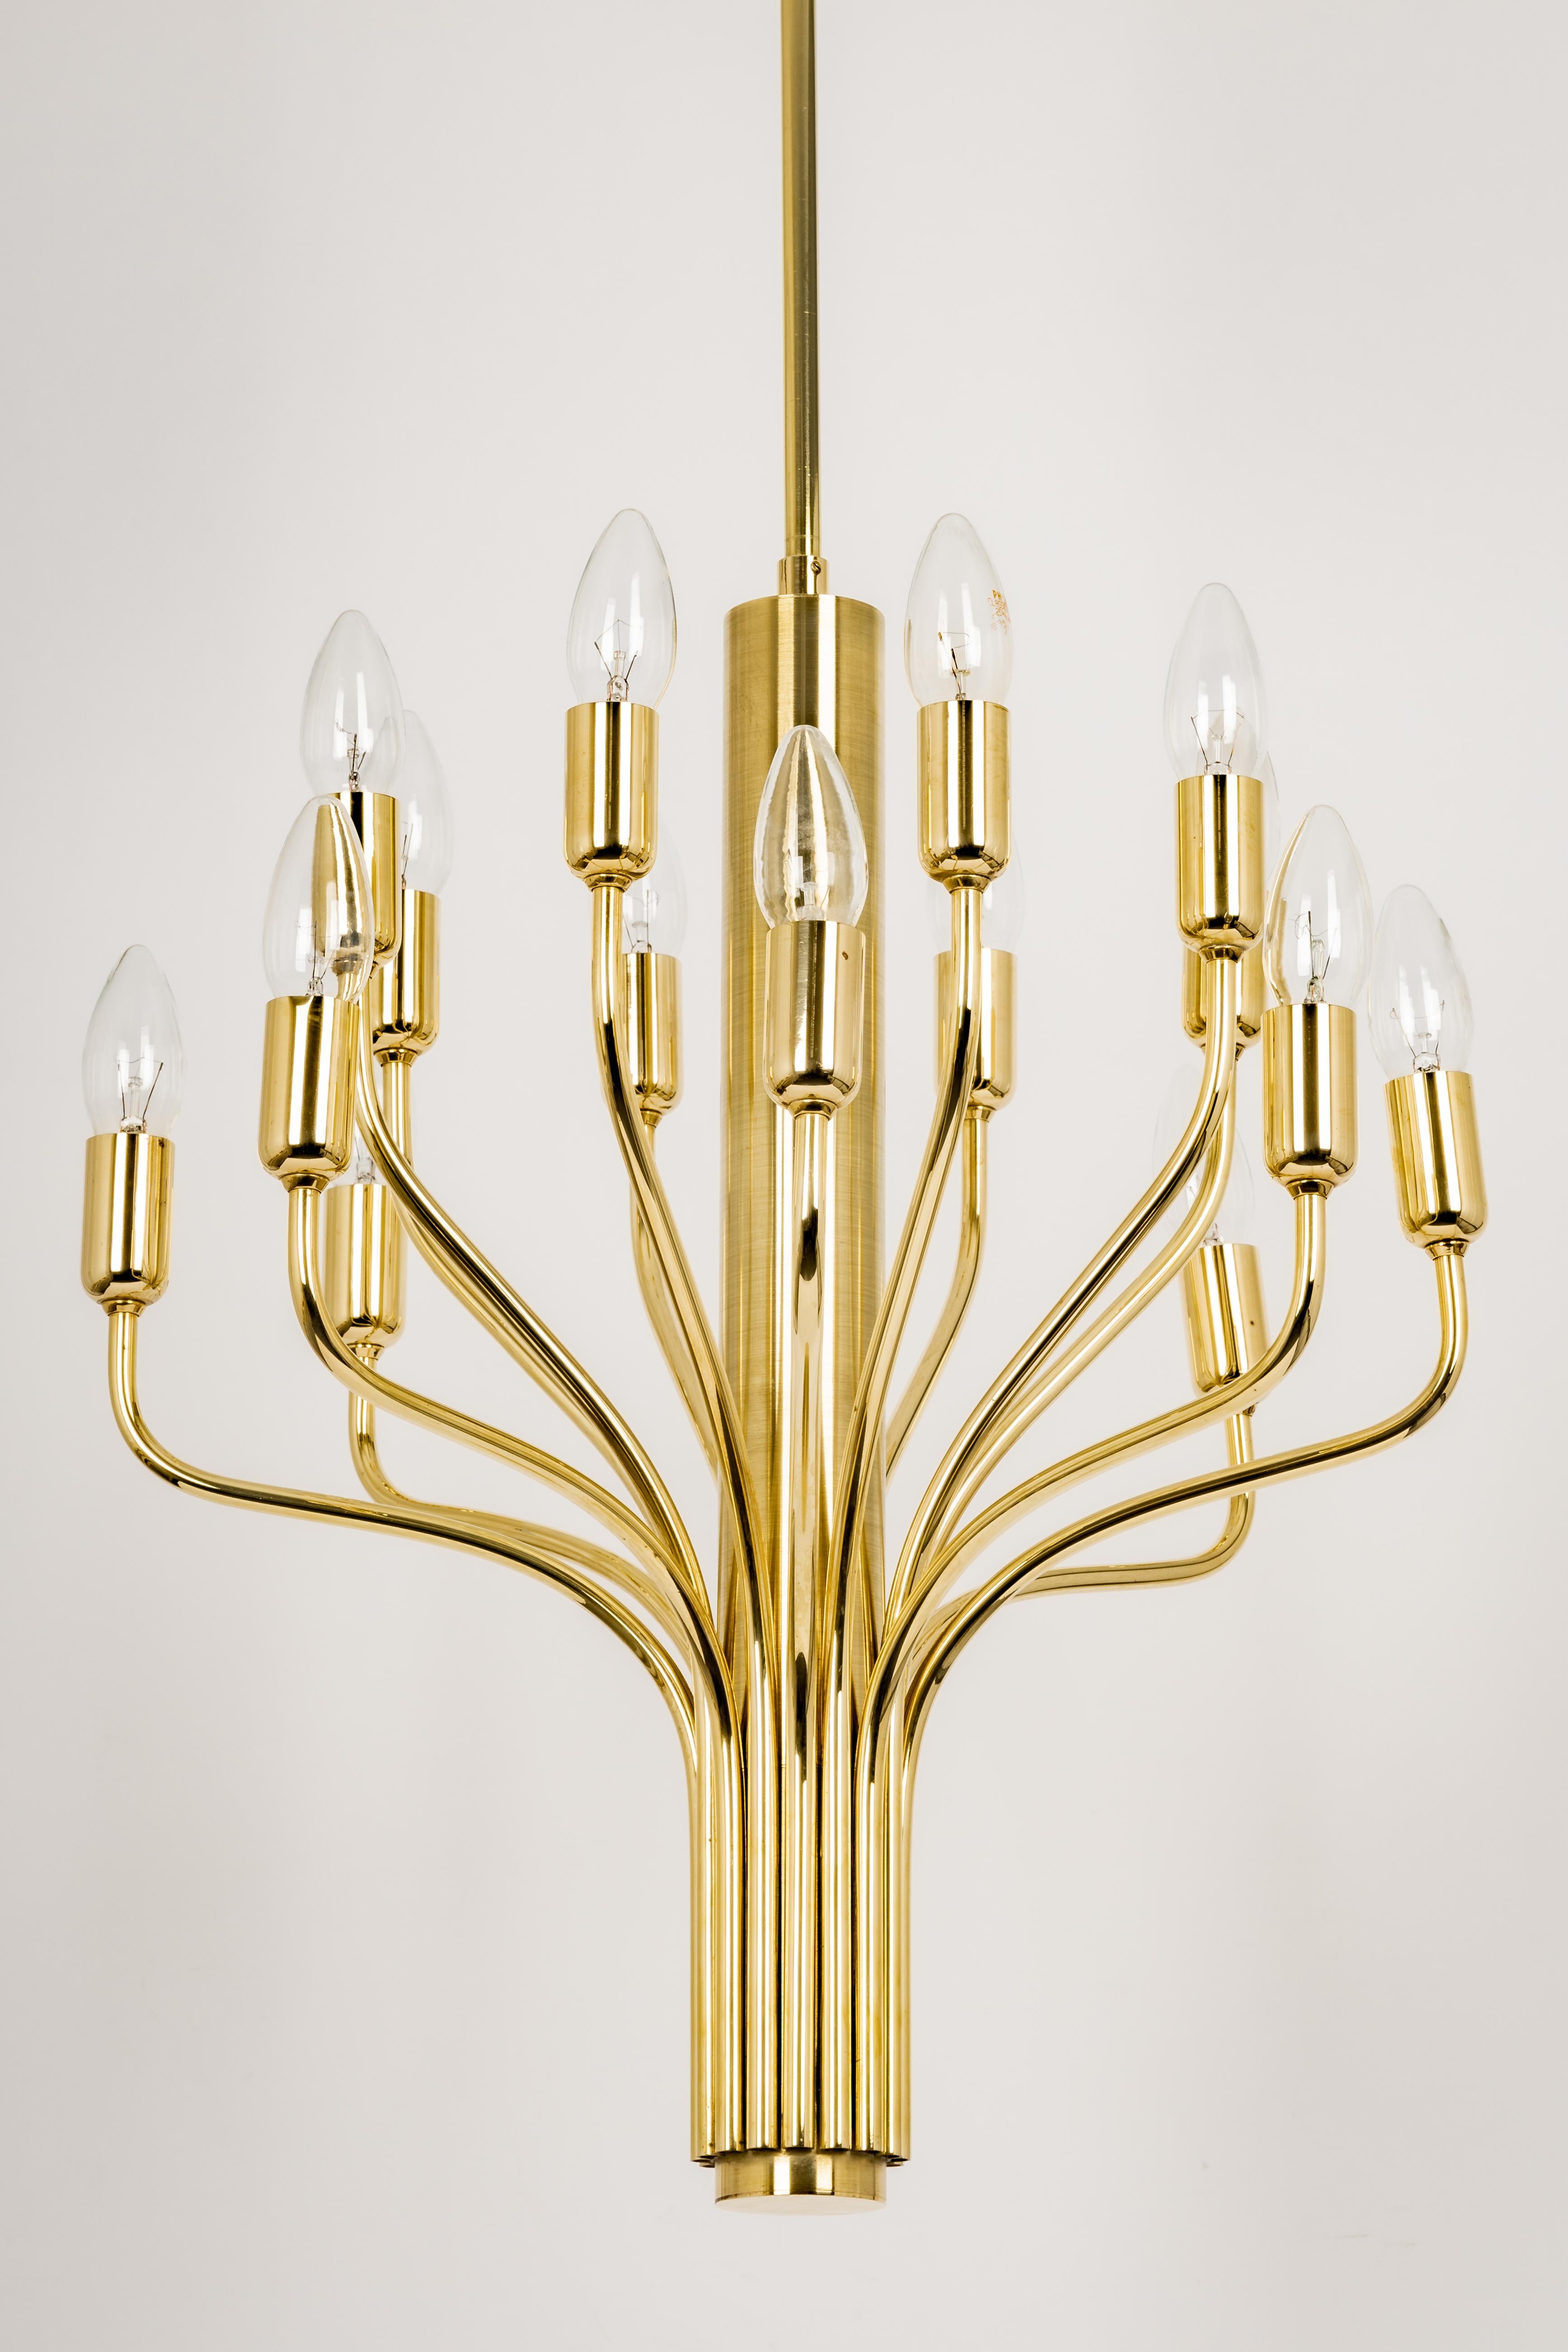 Wonderful midcentury brass chandelier in the manner of Sciolari made by Staff Leuchten, manufactured in Germany, circa 1970s.

Sockets: 16 x E14 small bulbs./ max. 40 watt each-
Light bulbs are not included. It is possible to install this fixture